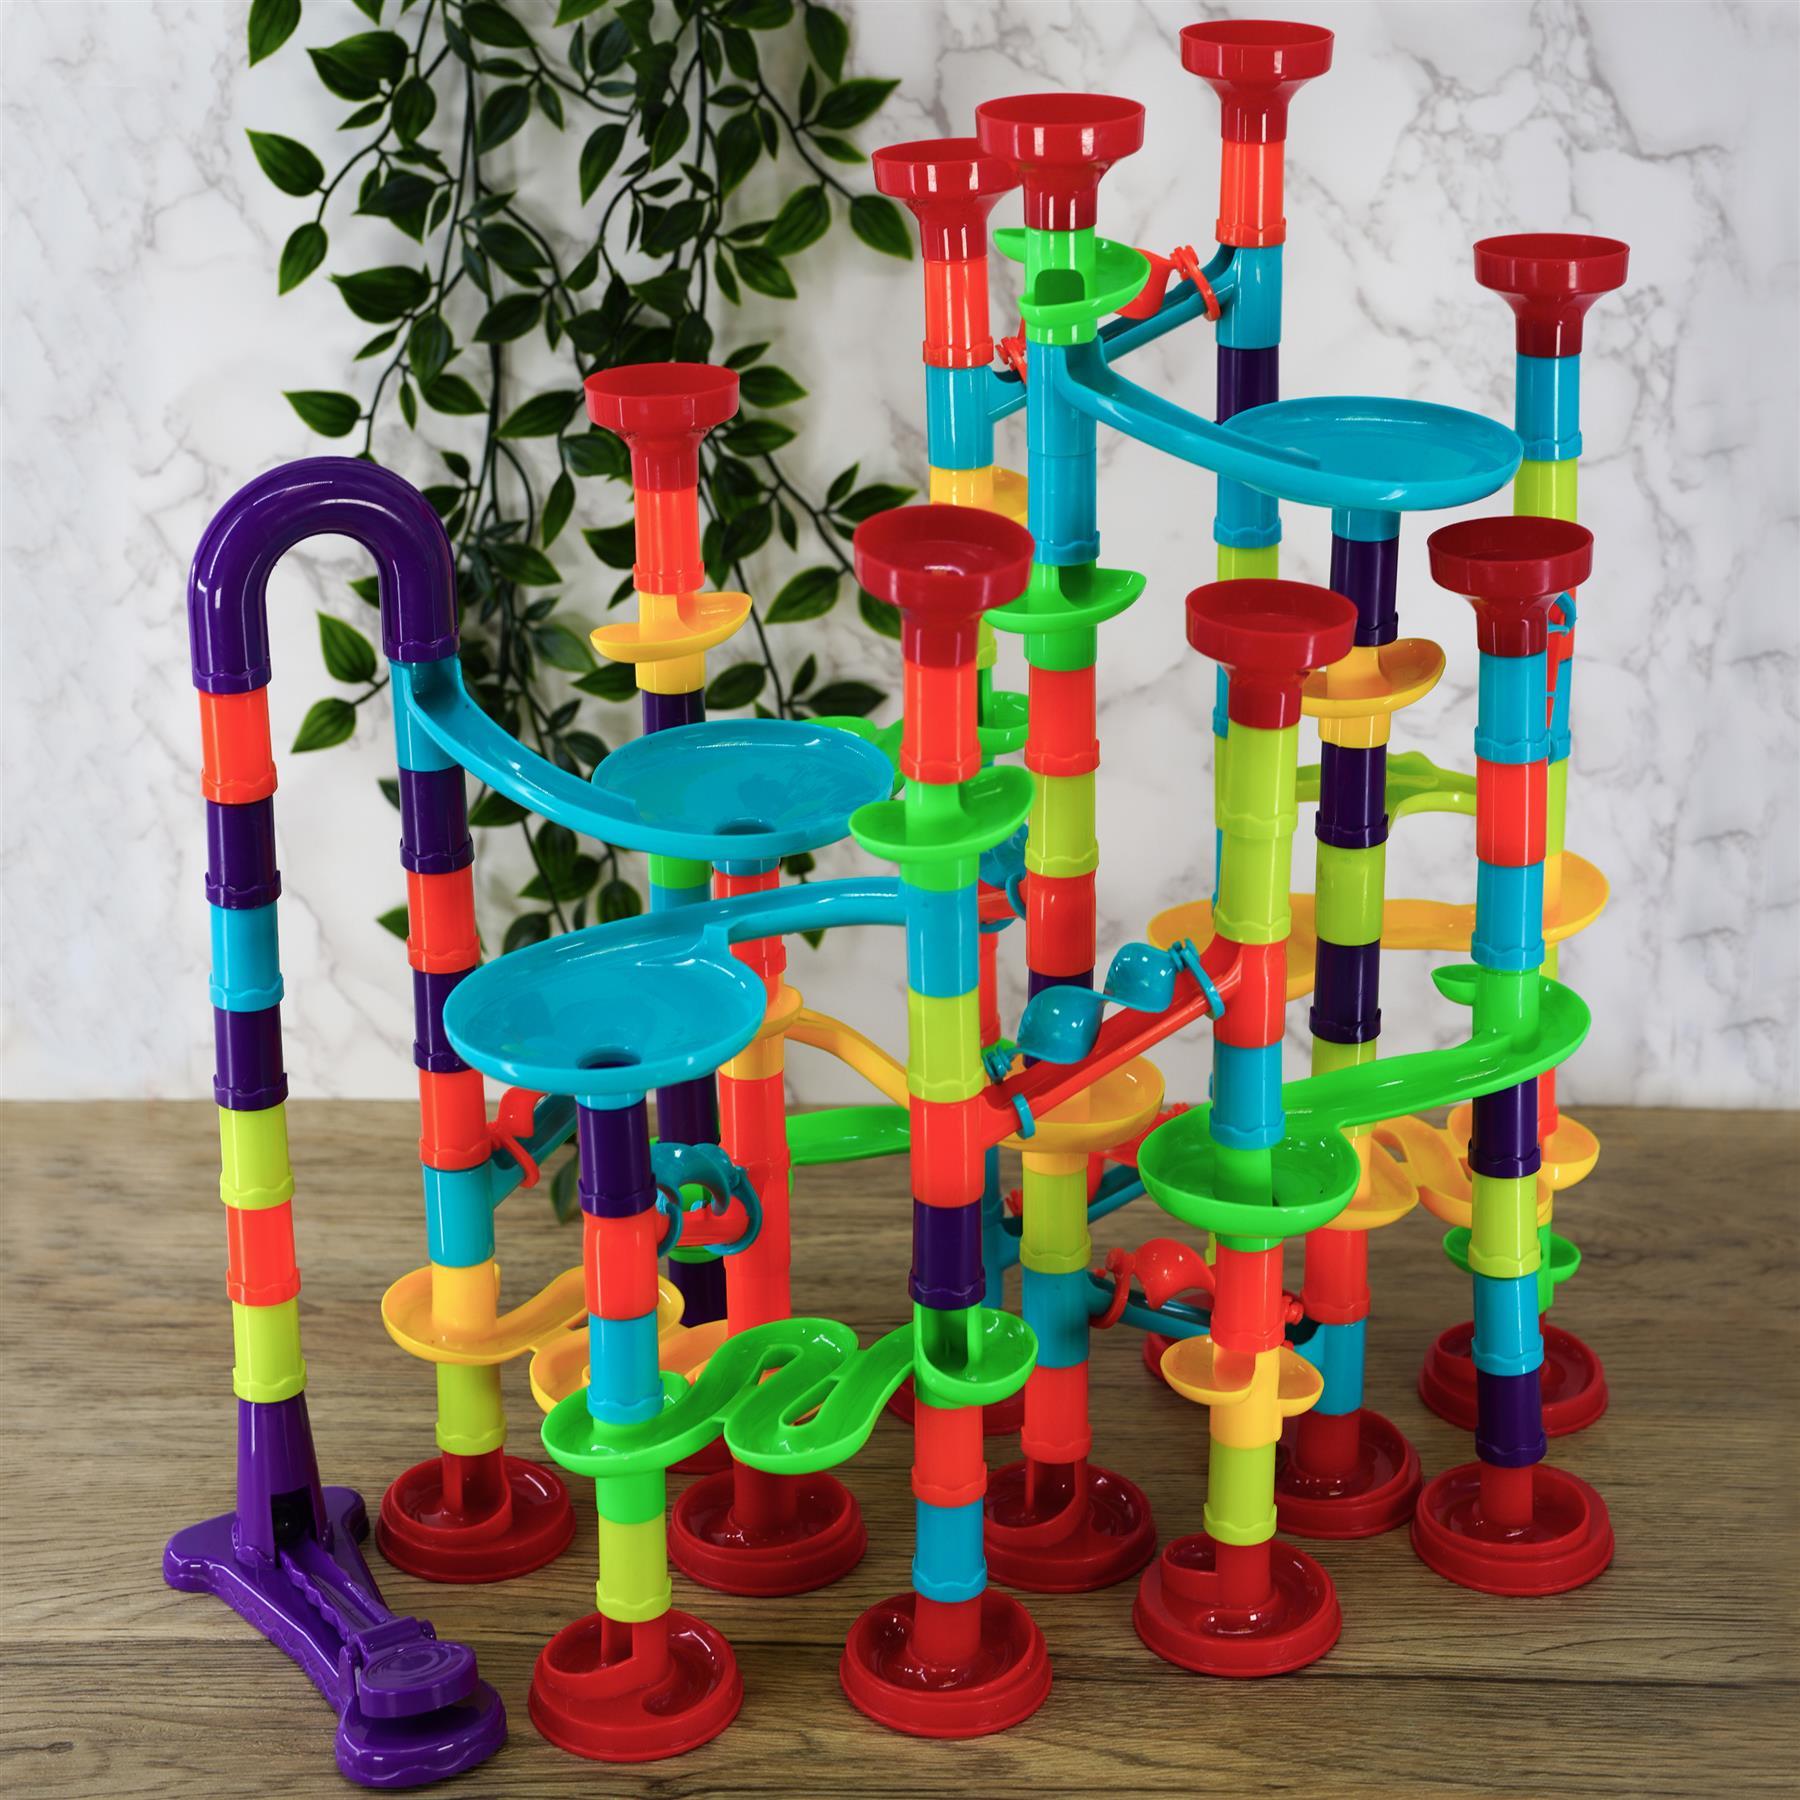 197 pieces Marble Run Set by The Magic Toy Shop - UKBuyZone